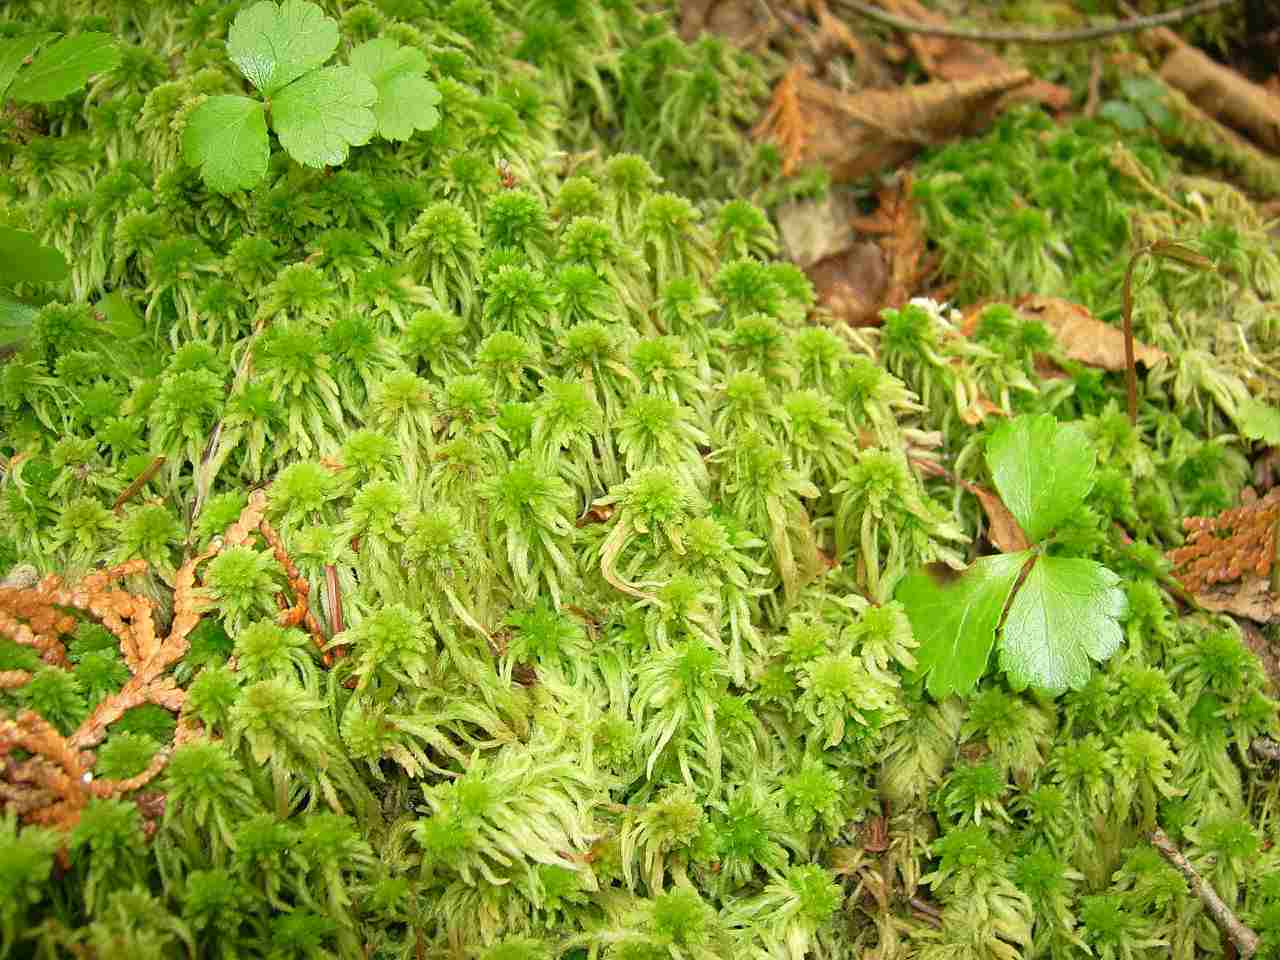 Is Moss a Decomposer: Photosynthetic Capabilities Classify Mosses as Producers (Credit: Fungus Guy 2009 .CC BY-SA 3.0.)